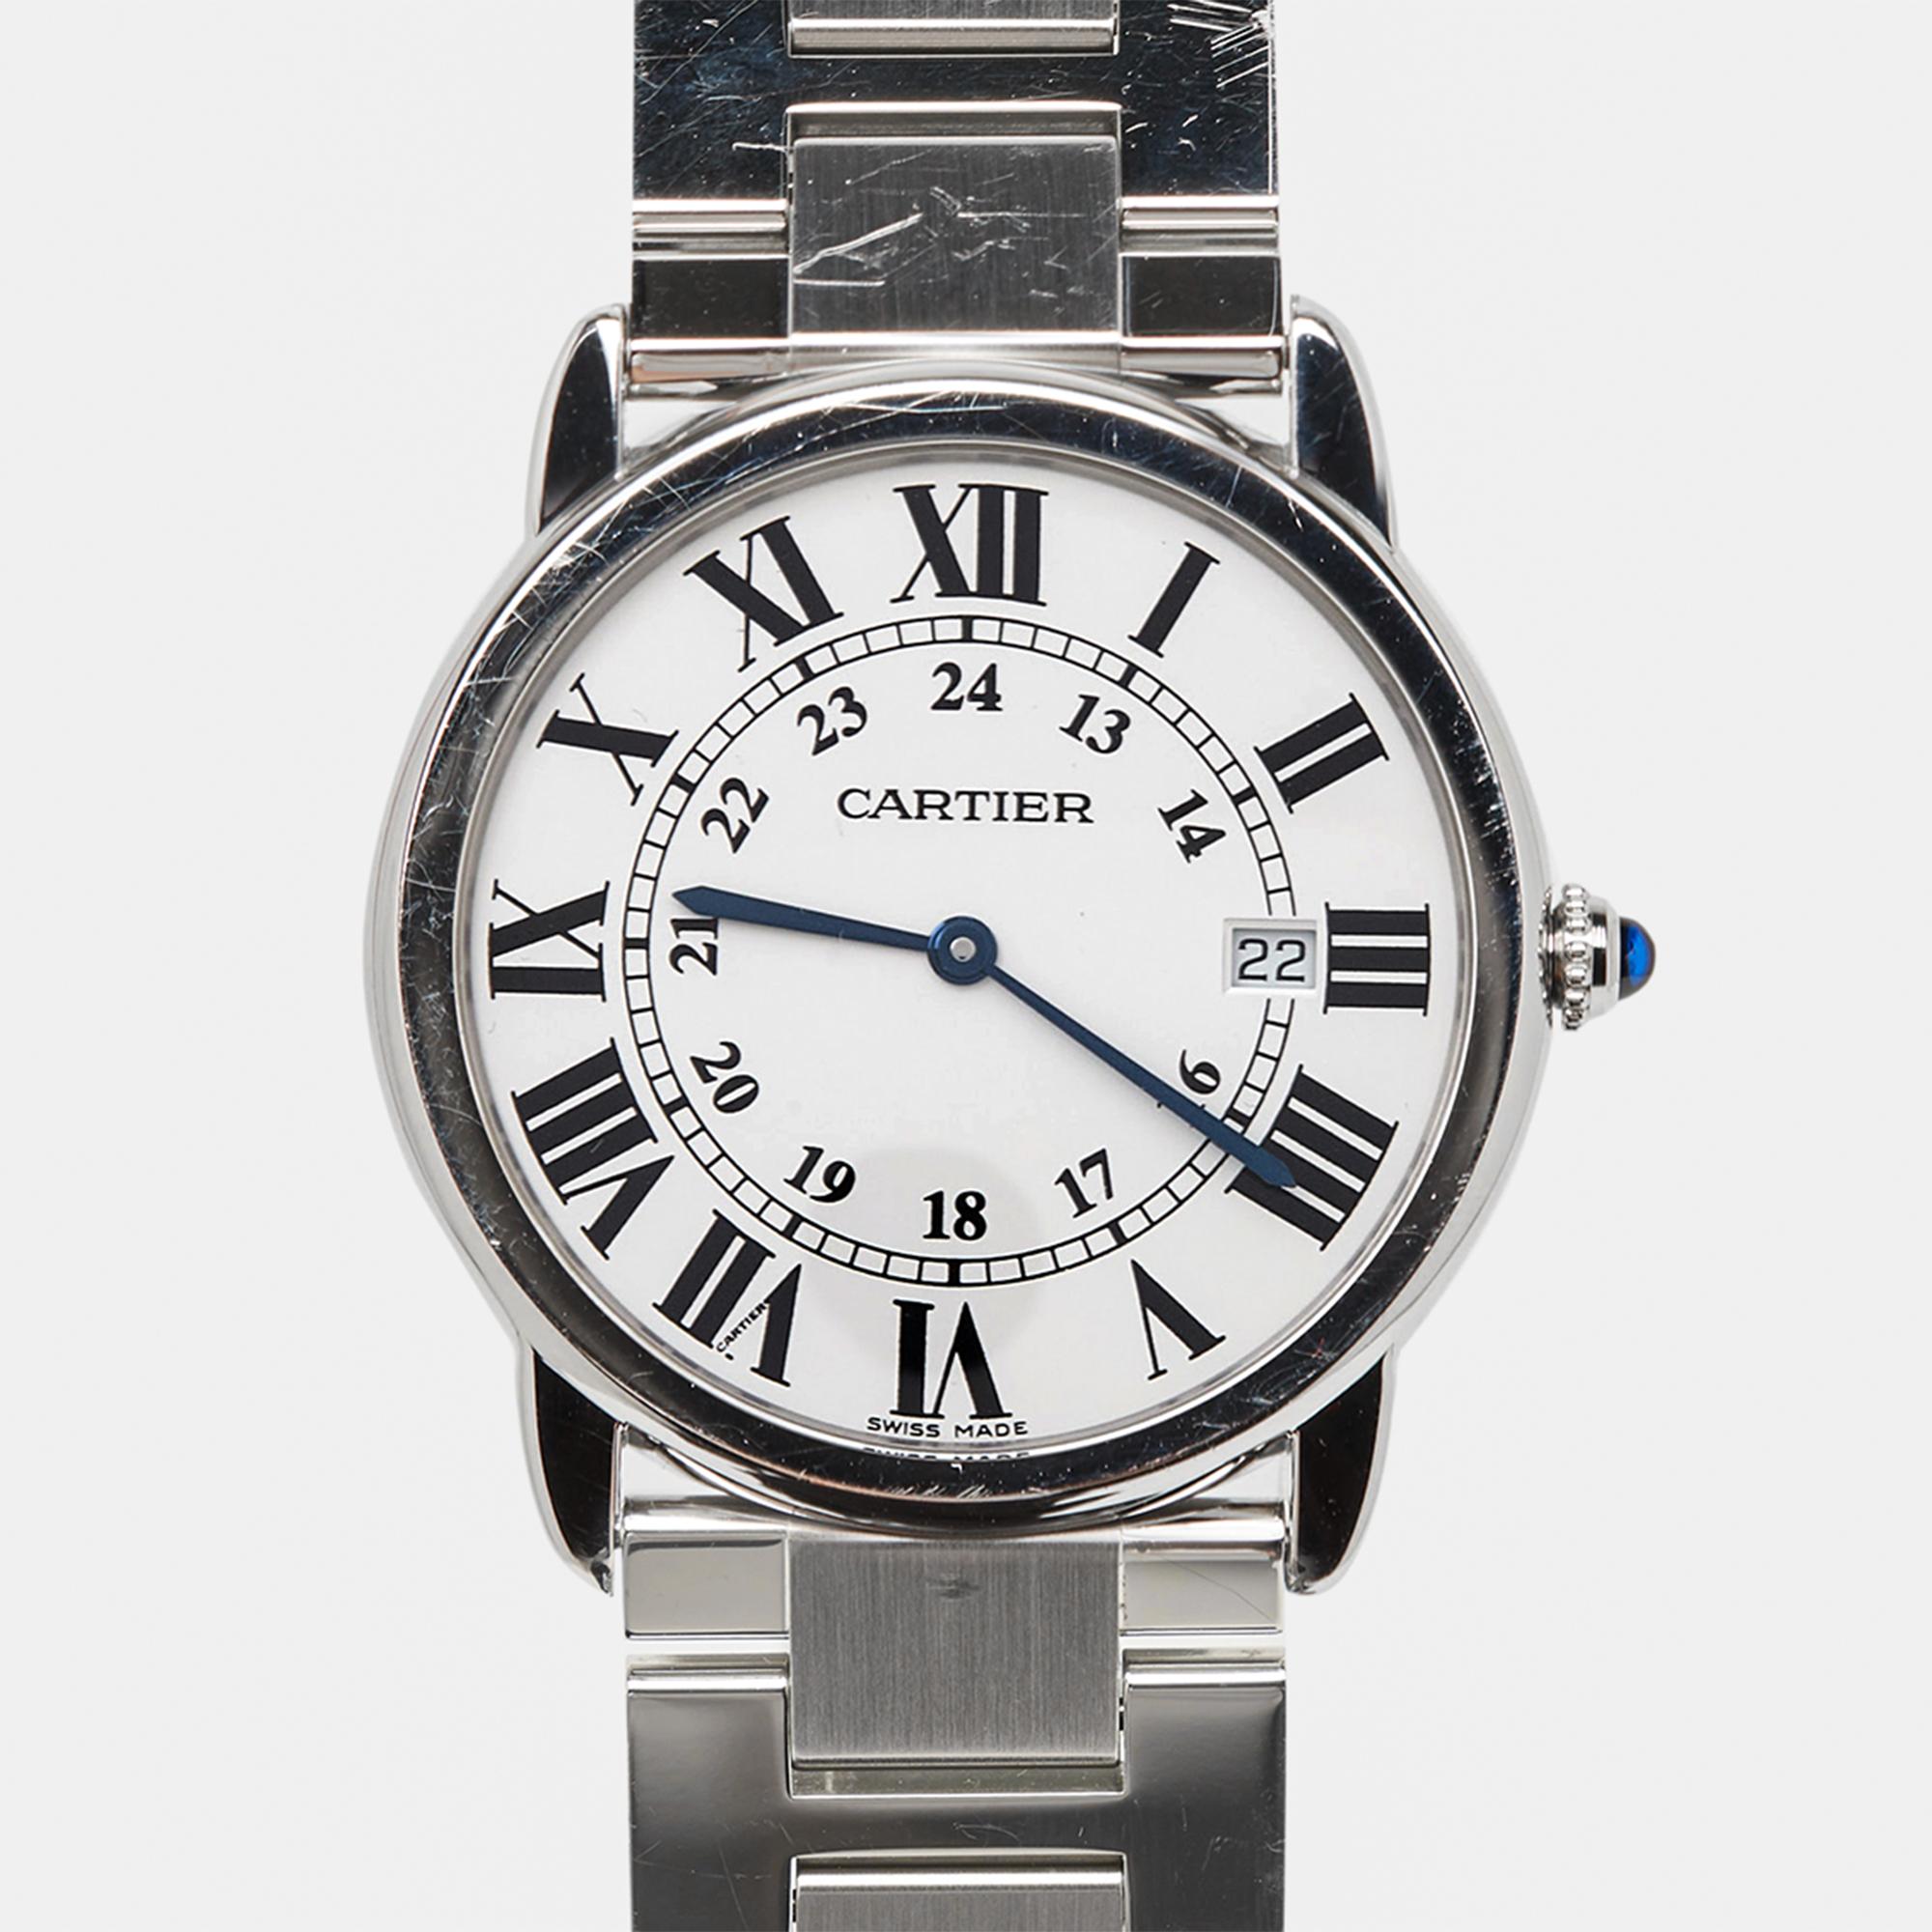 Let this fine designer wristwatch accompany you with ease and luxurious style. Beautifully crafted using the best quality materials, this authentic branded watch is built to be a standout accessory for your wrist.

Includes
Cartier Gift Box